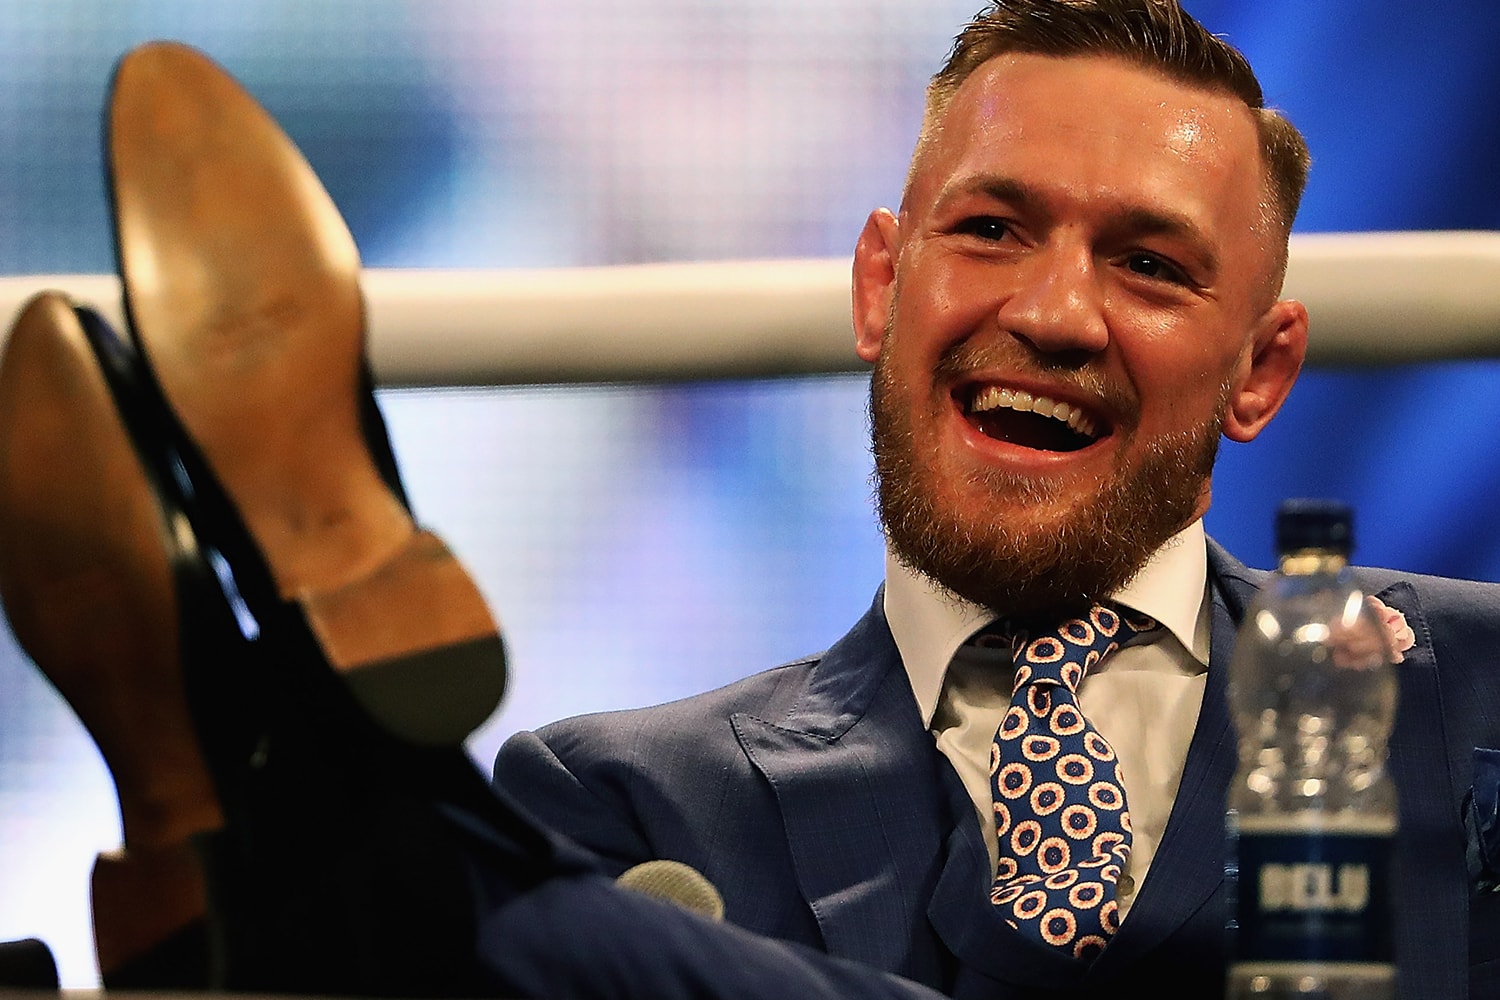 Conor Mcgregor Buys Pub Marble Arch Assaulted Customer Bans Him Buying Manchester United Info MMA UFC Boxing